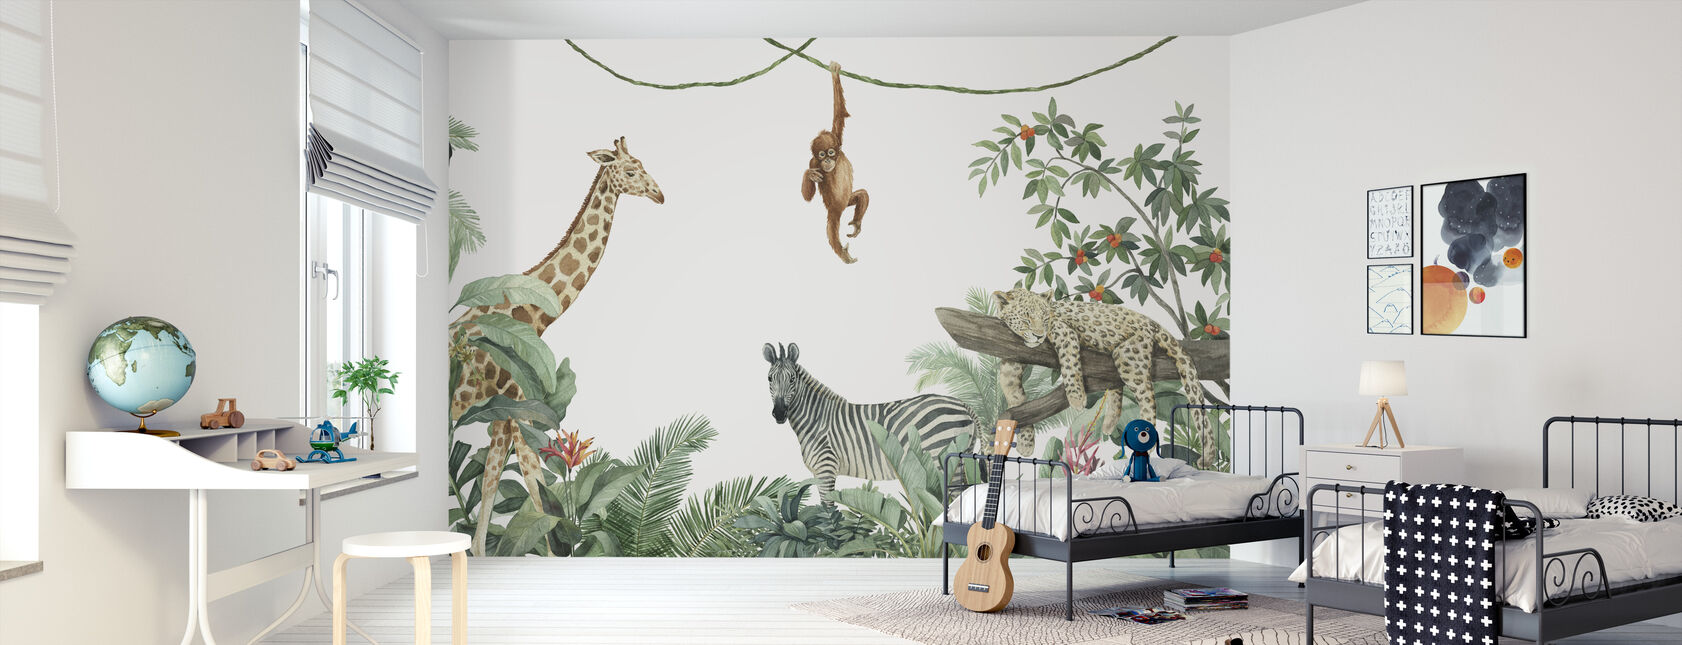 Nature High Quality Wall Murals Photowall Images, Photos, Reviews